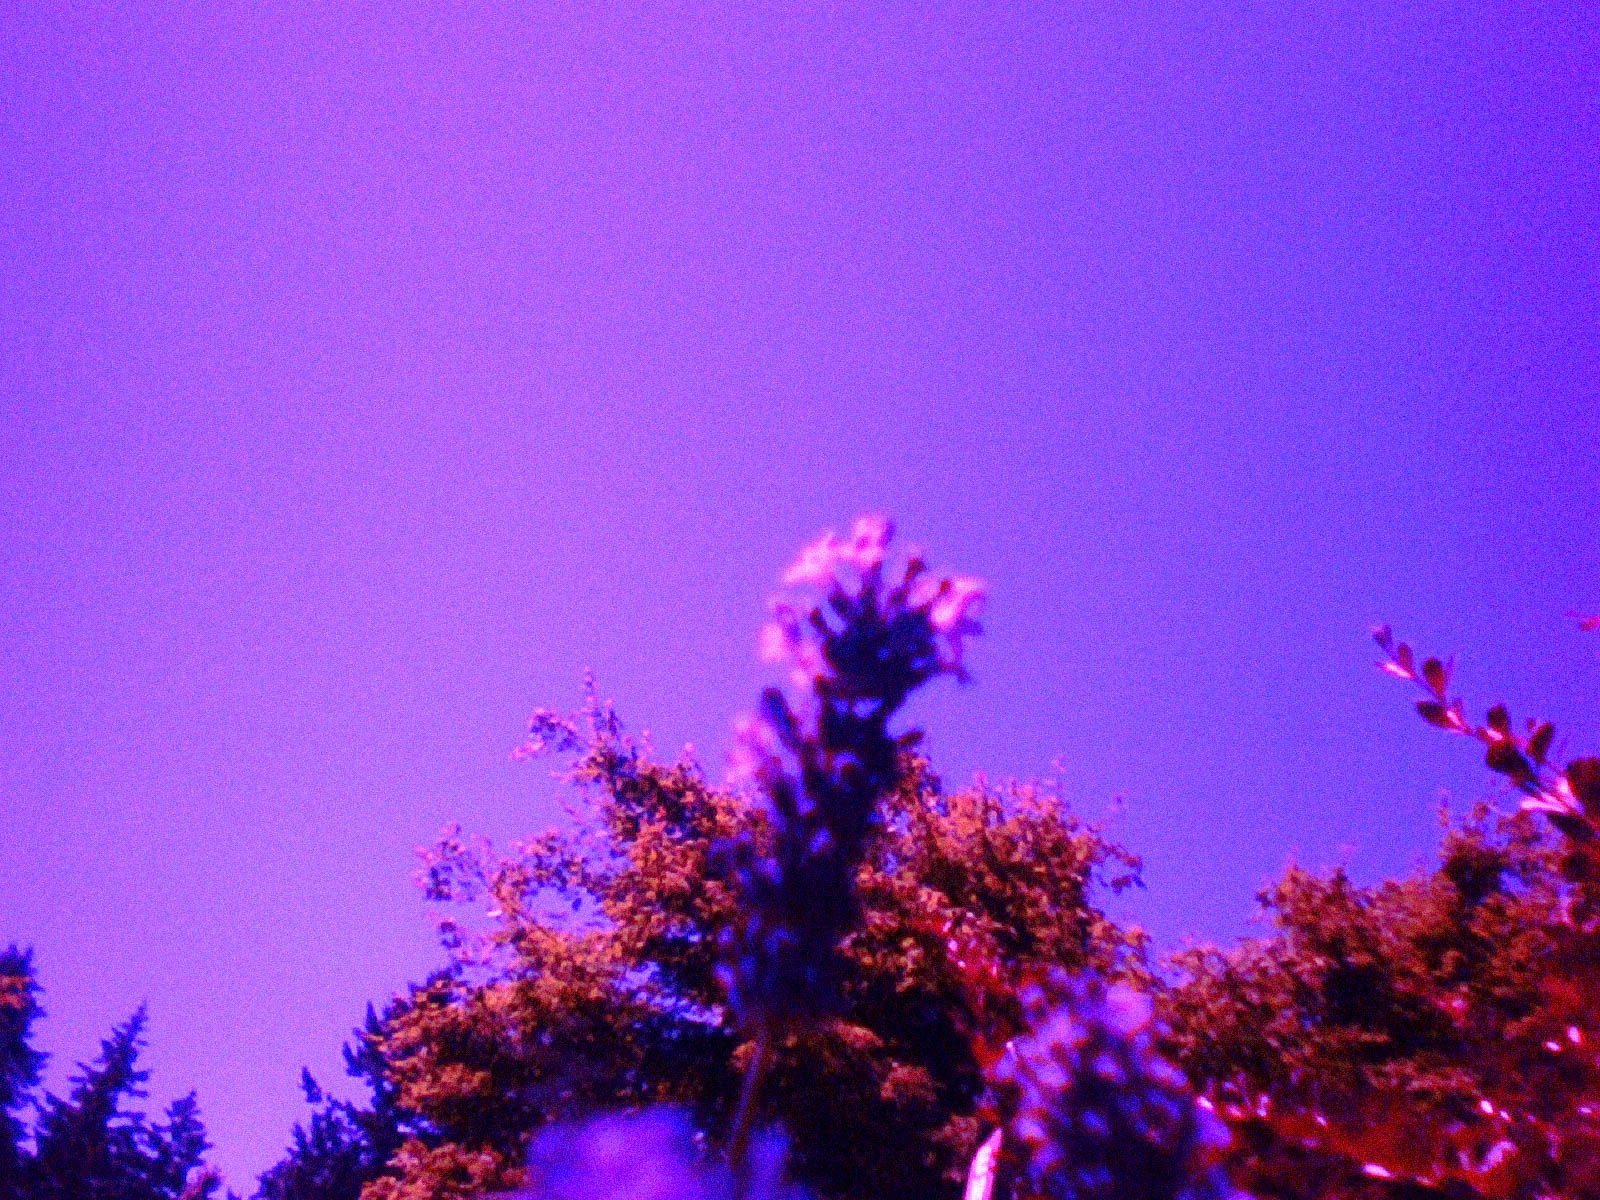 A view of flowers and trees under a vivid purple sky.